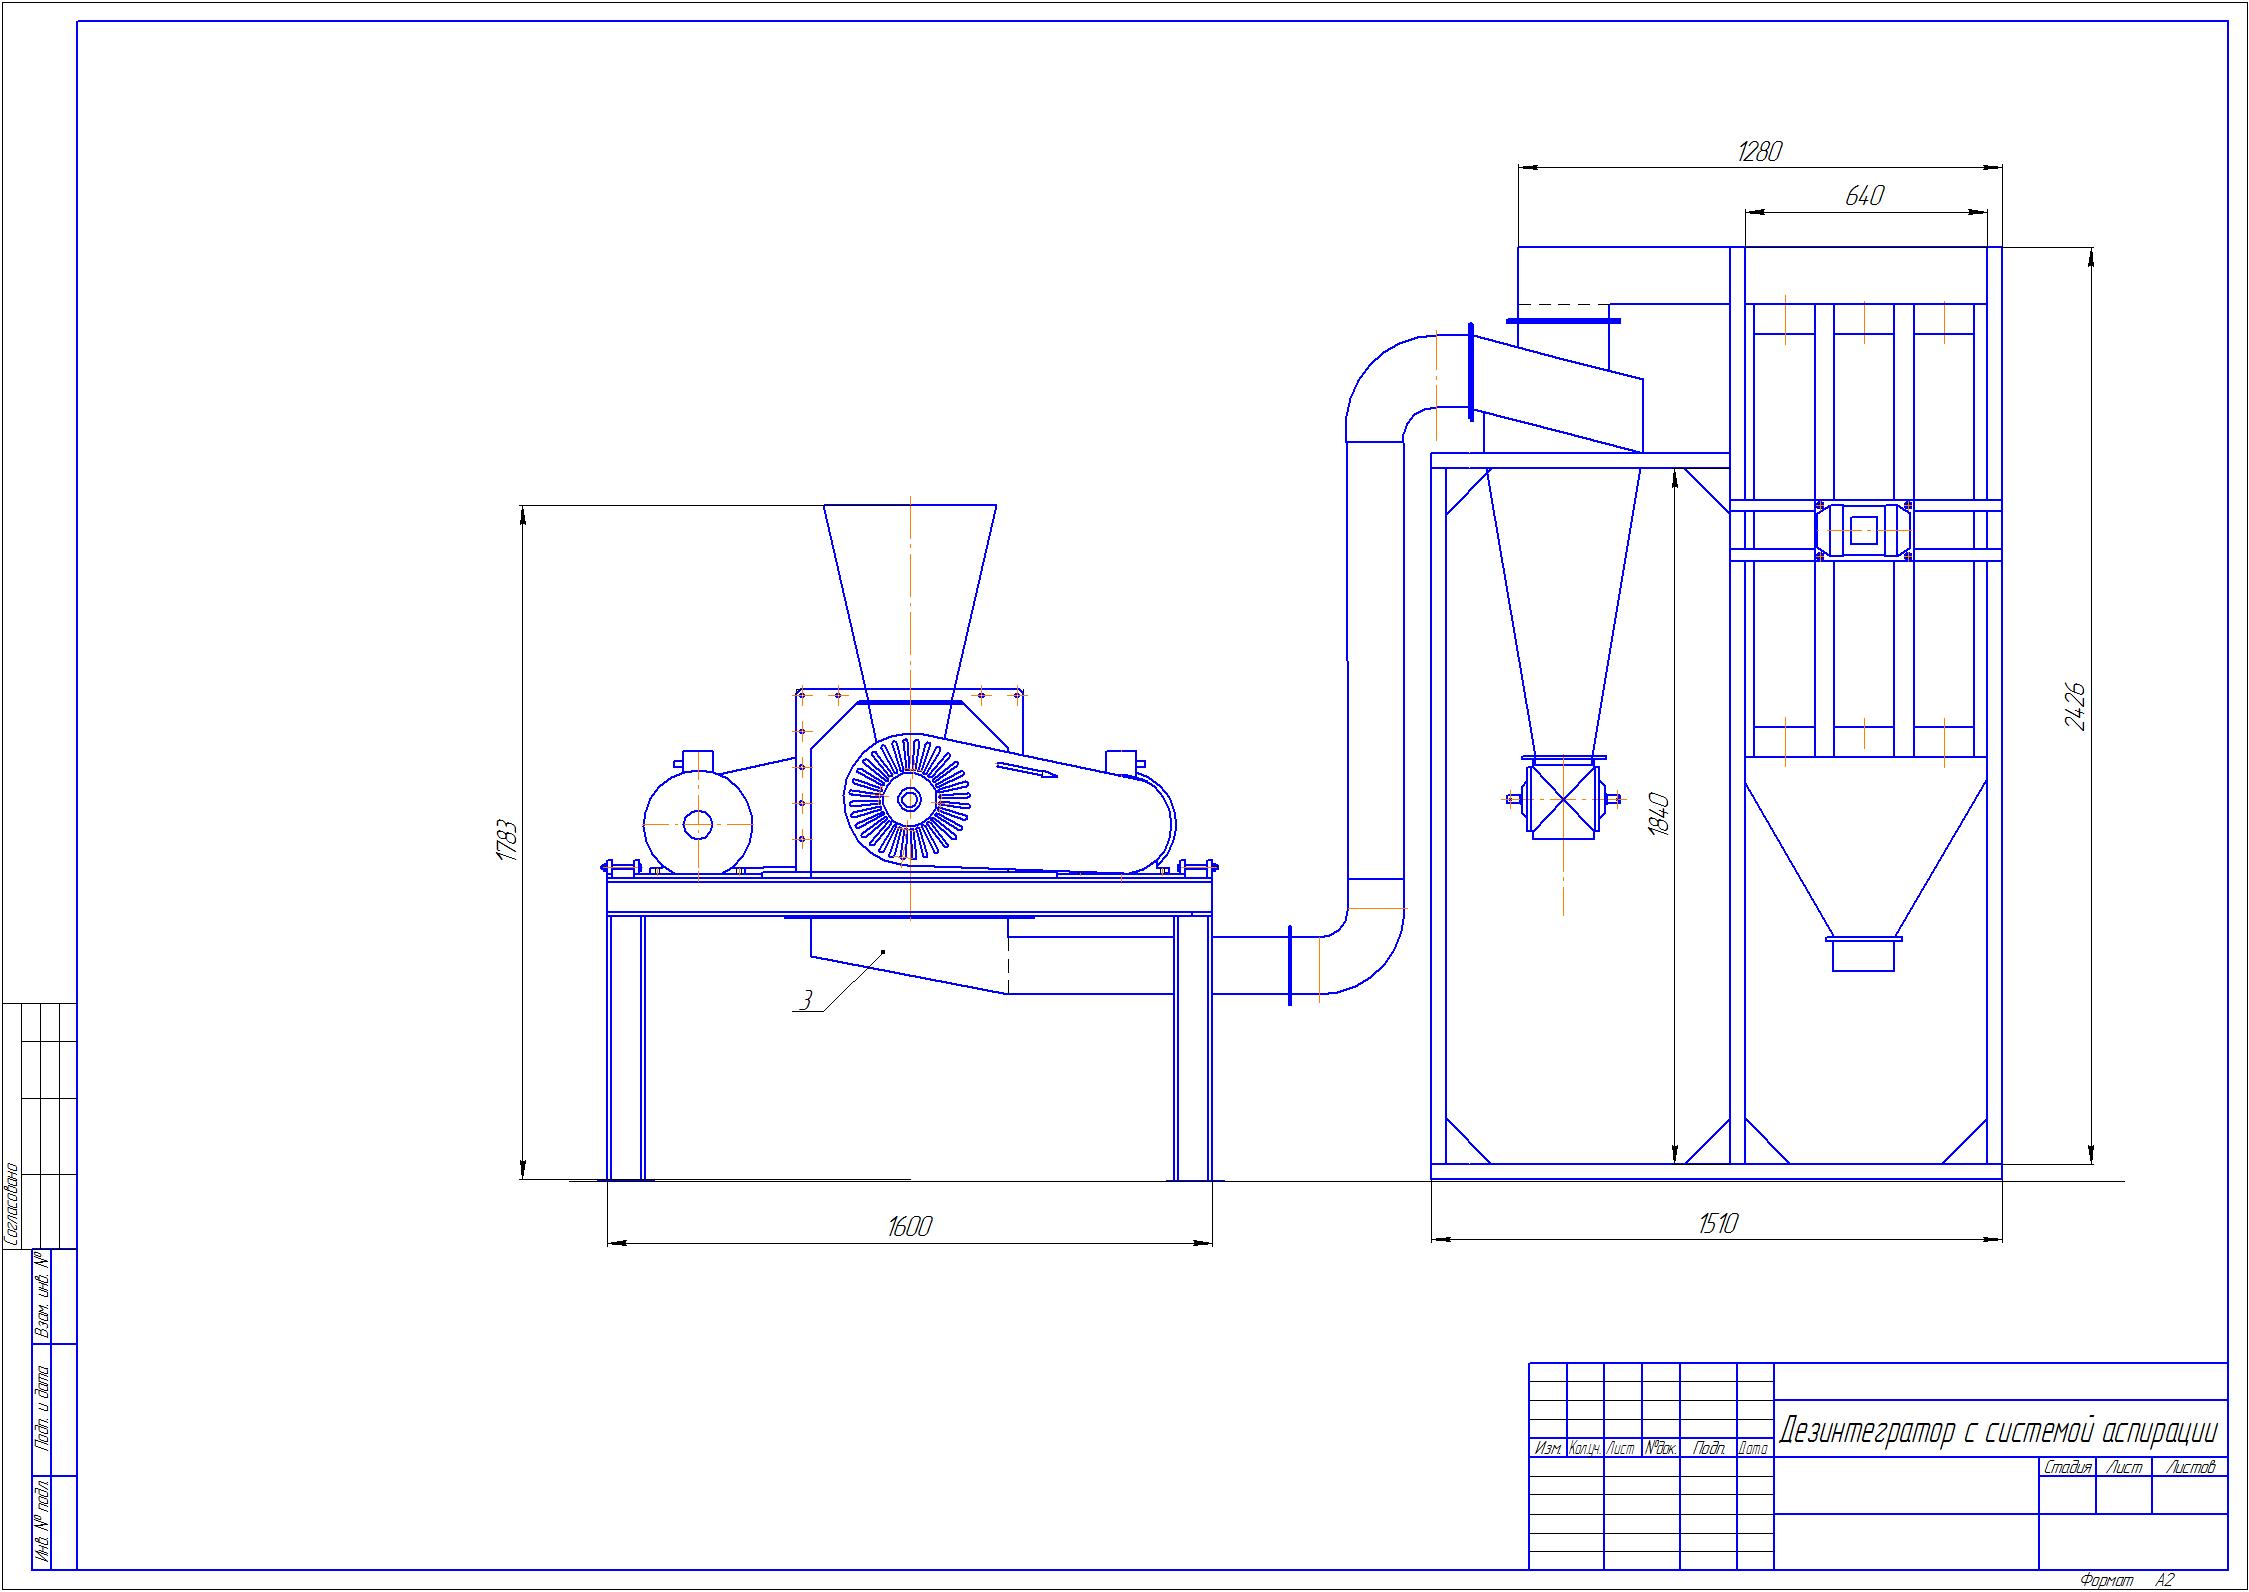 Simple Grinding Mill Complex based on Disintegrator